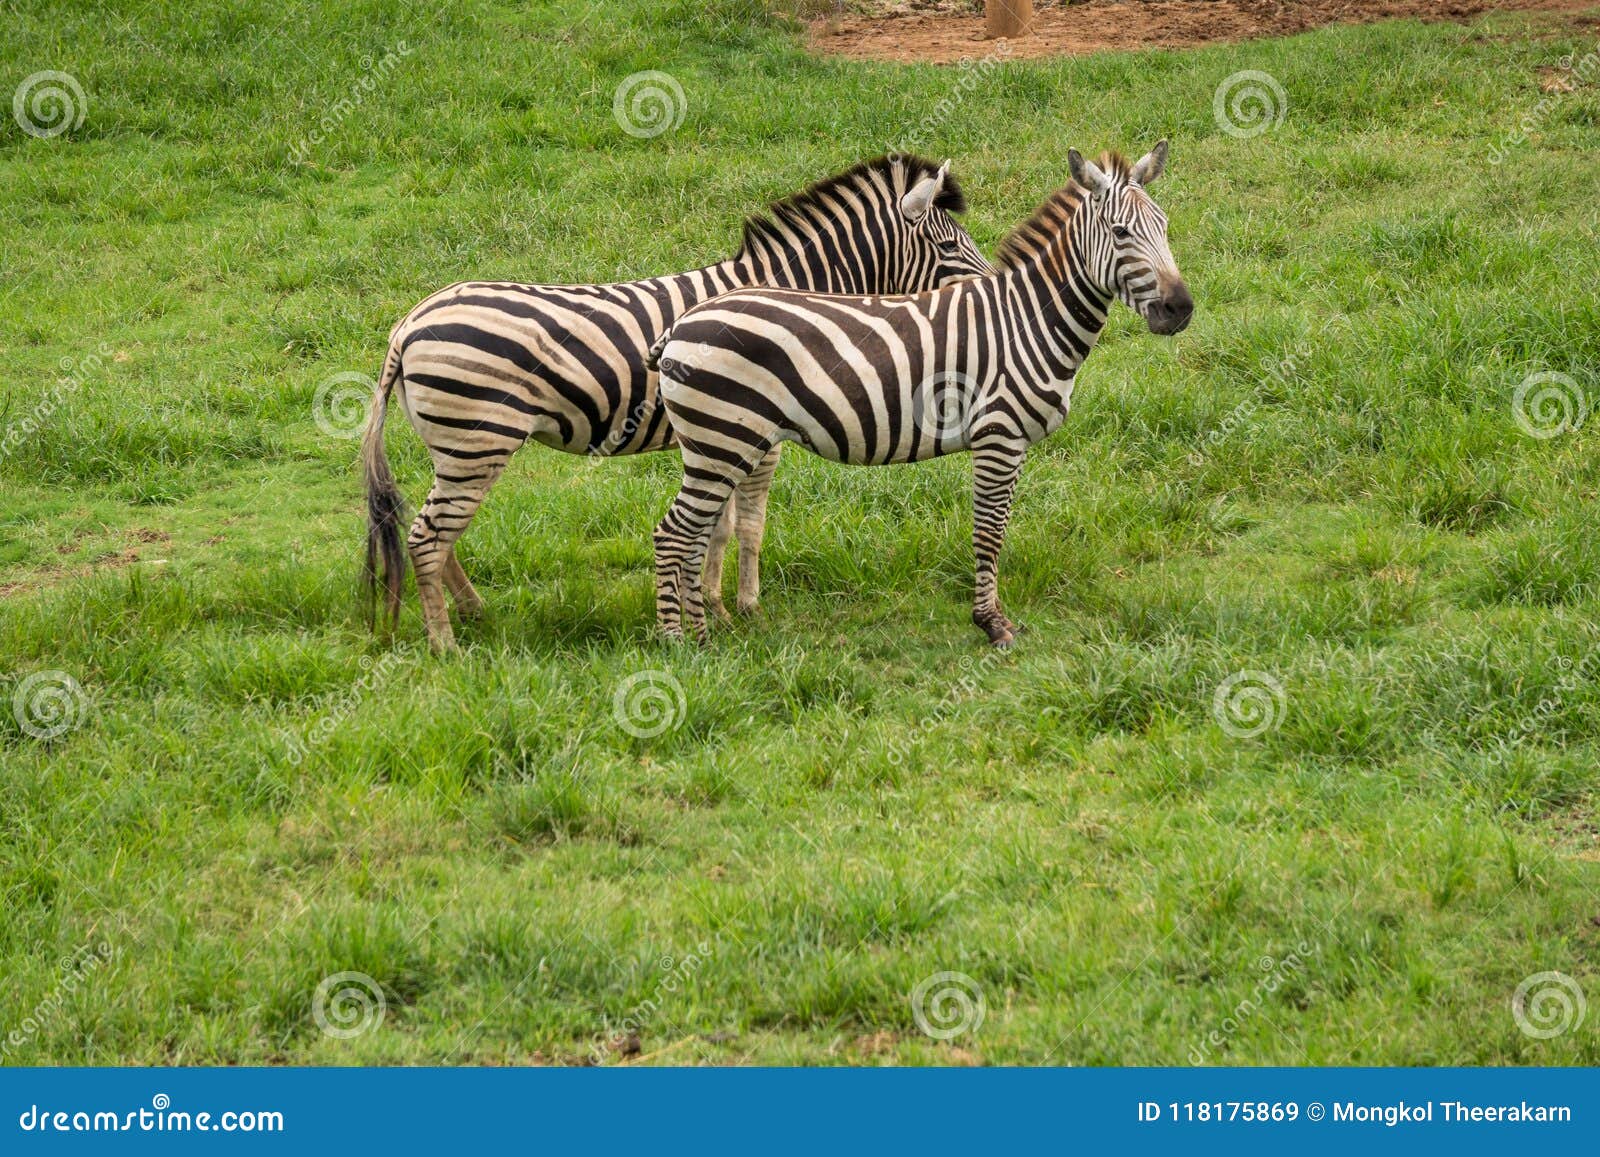 Two Wild Zebras on Meadow Like Horse with Black and White Lines on Its Body  Stock Image - Image of wildlife, like: 118175869